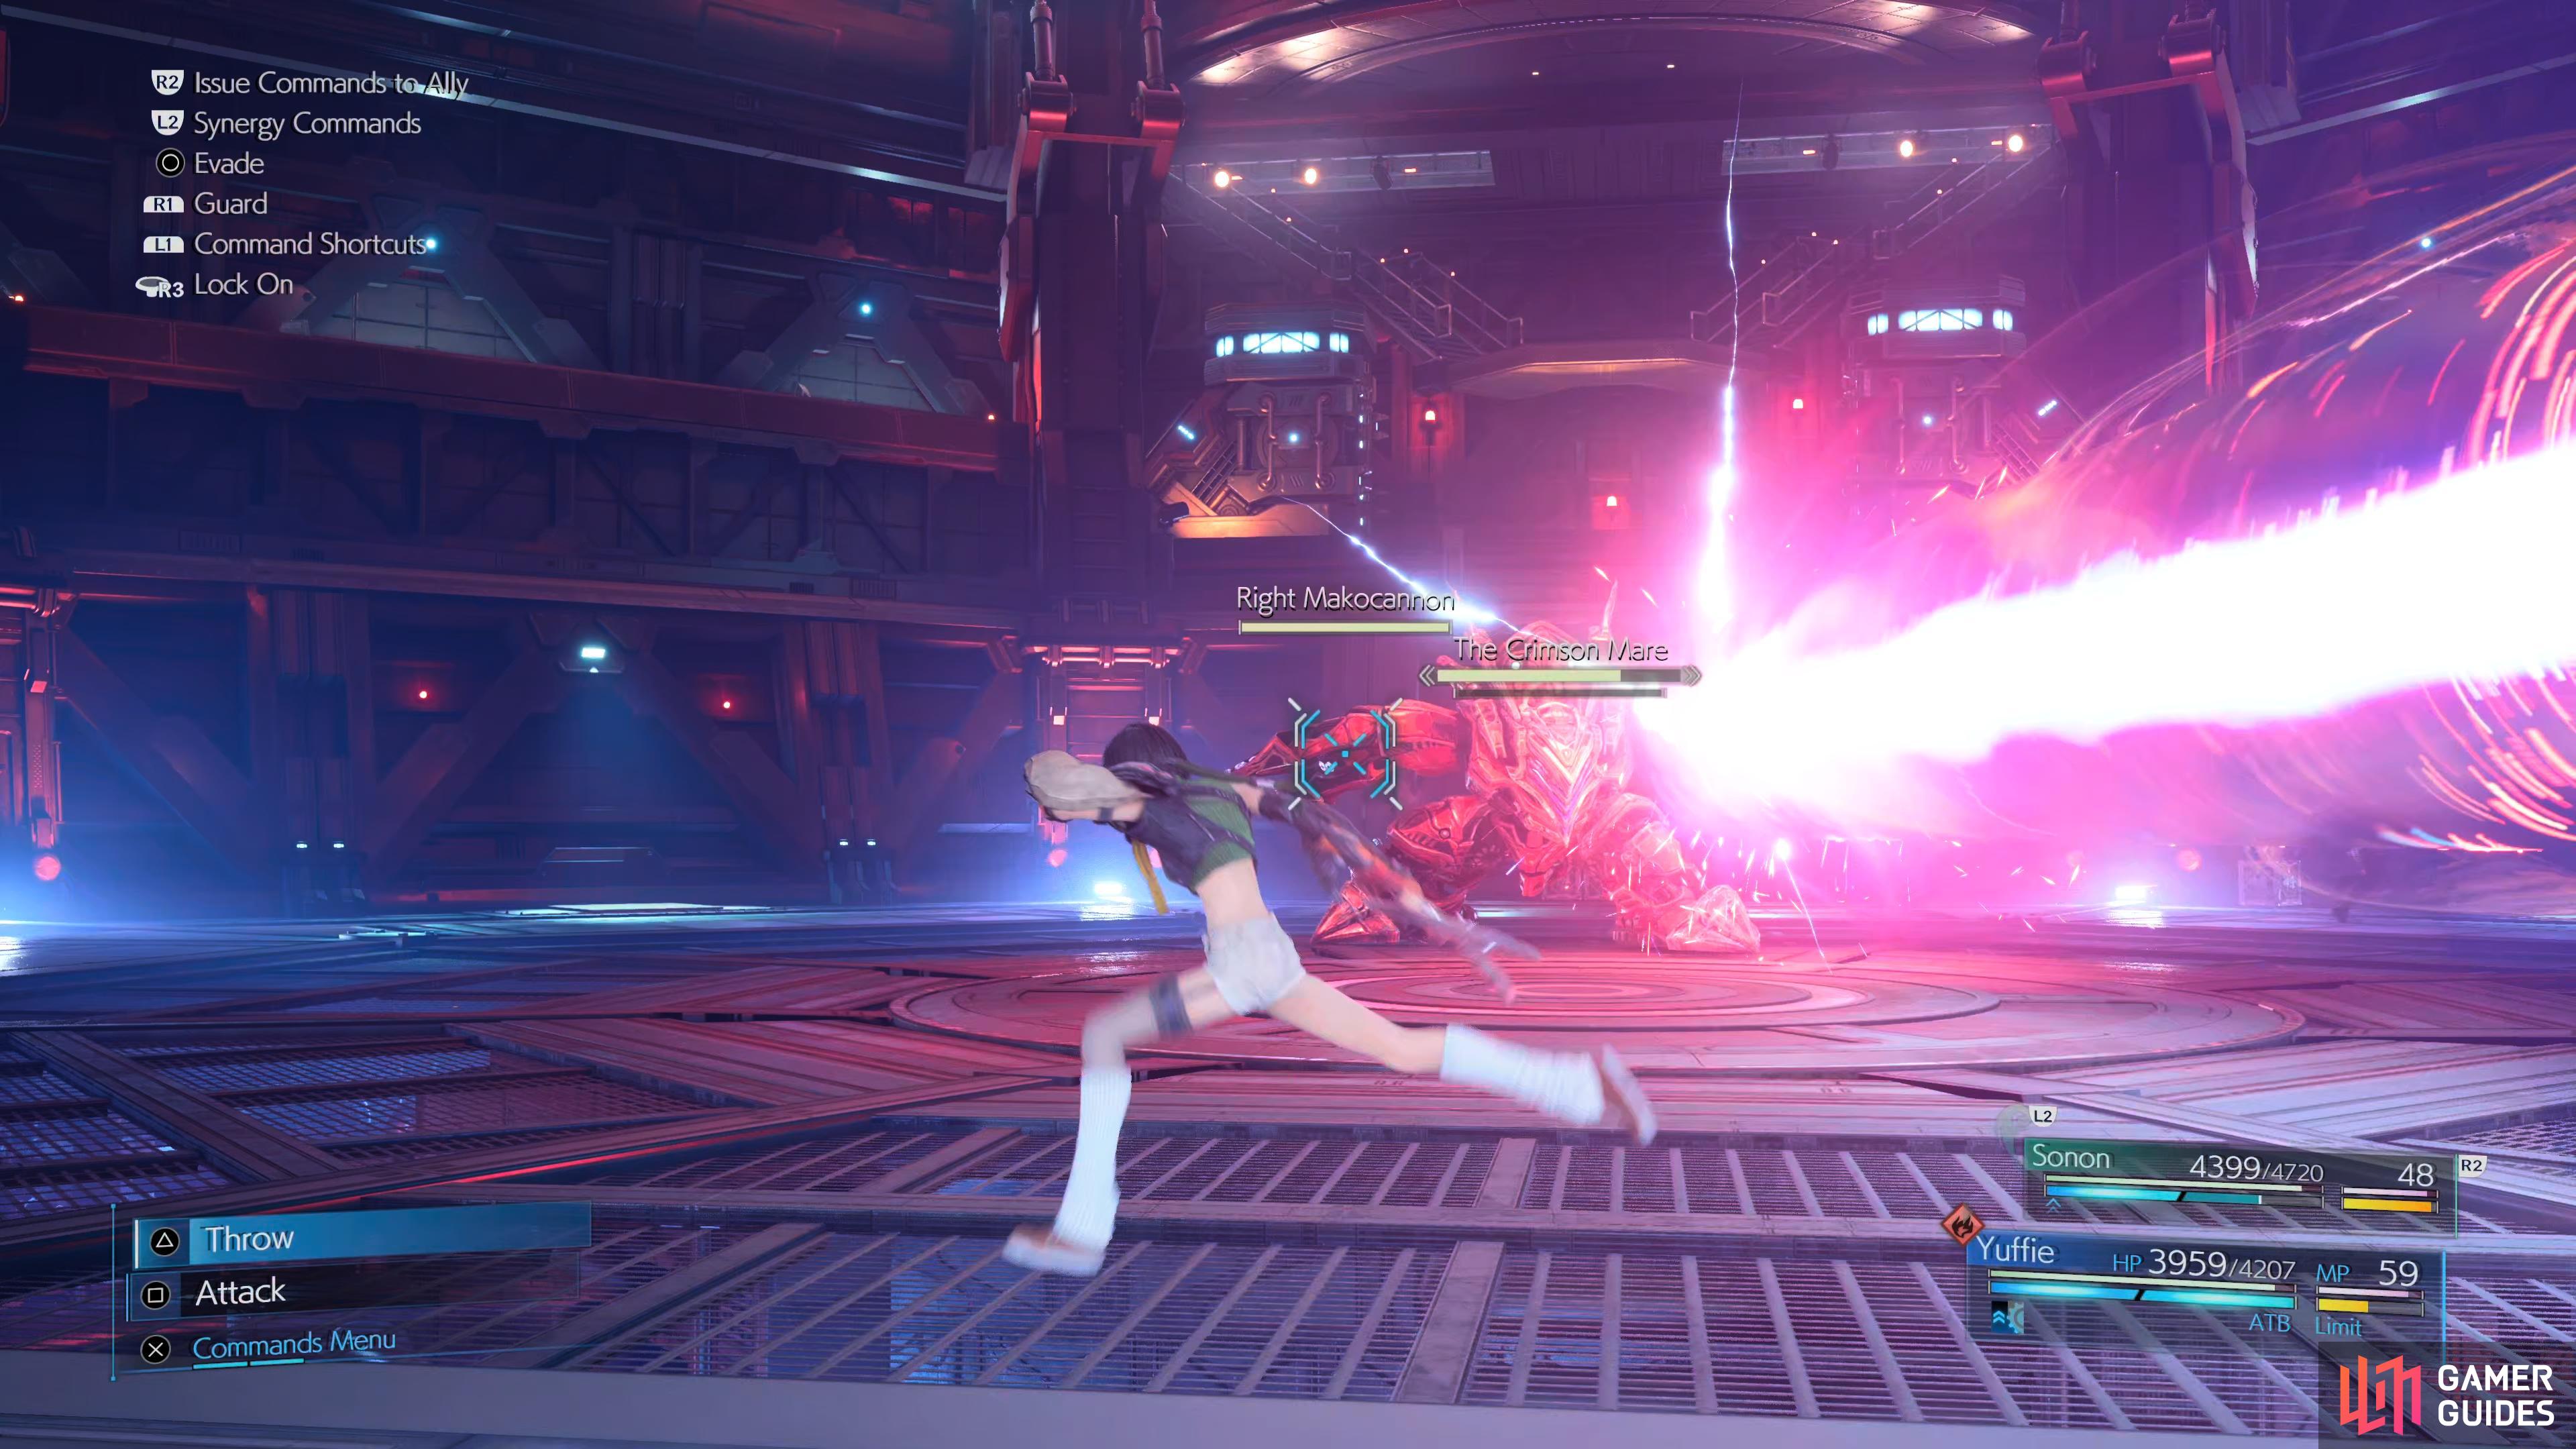 The Makocannon Beam will deal moderate damage to anyone struck by it